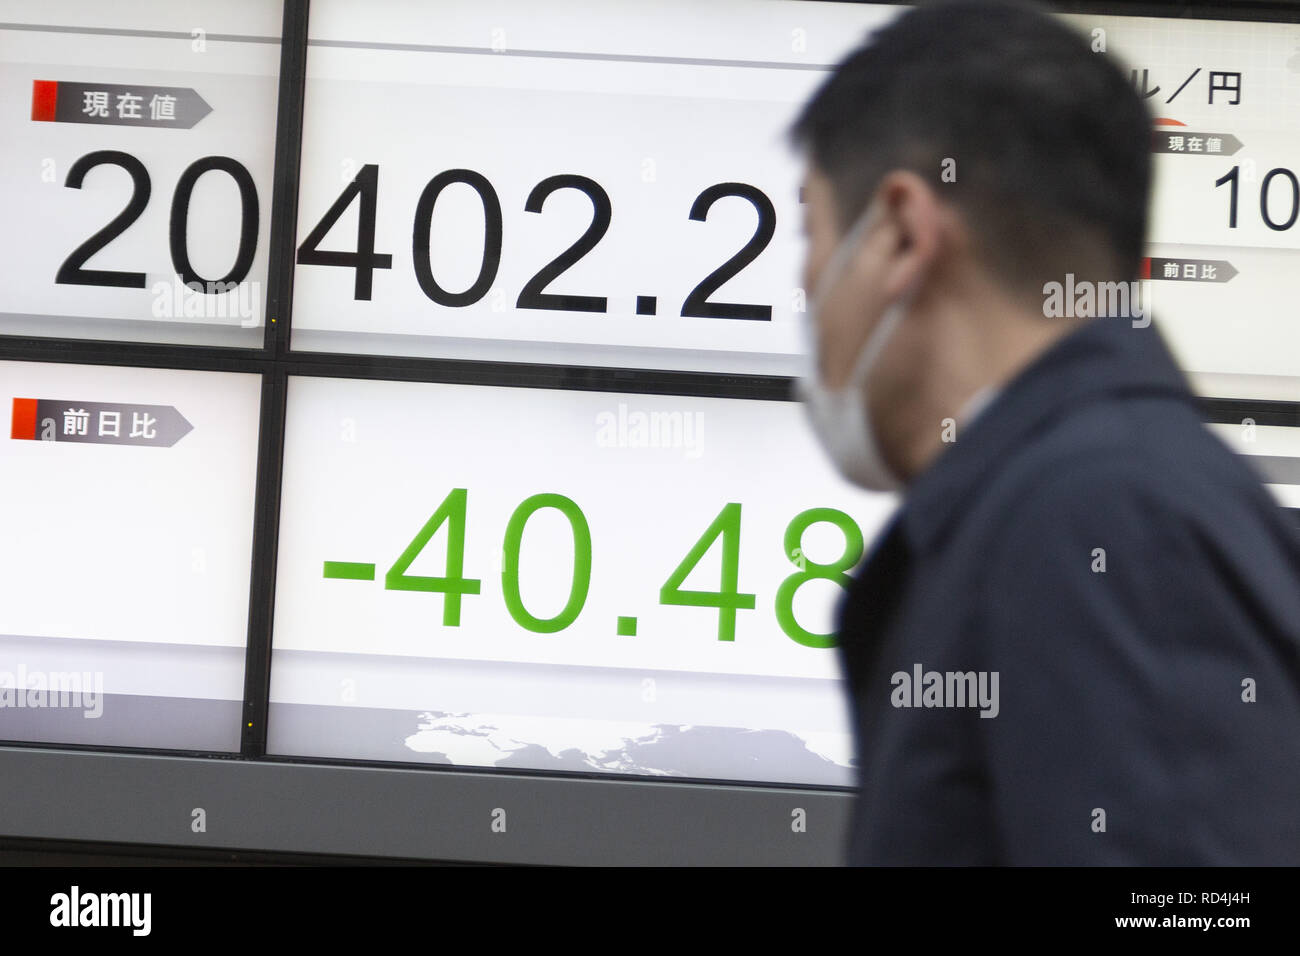 January 17, 2019 - Tokyo, Japan - A man walks past an electronic stock board showing Japan's Nikkei Stock Average, which ended down 40.48 points or 0.20 percent to close at 20,402.27. The broader Topix index added 0.35 percent or 5.43 points to stand at 1,543.20. (Credit Image: © Rodrigo Reyes Marin/ZUMA Wire) Stock Photo